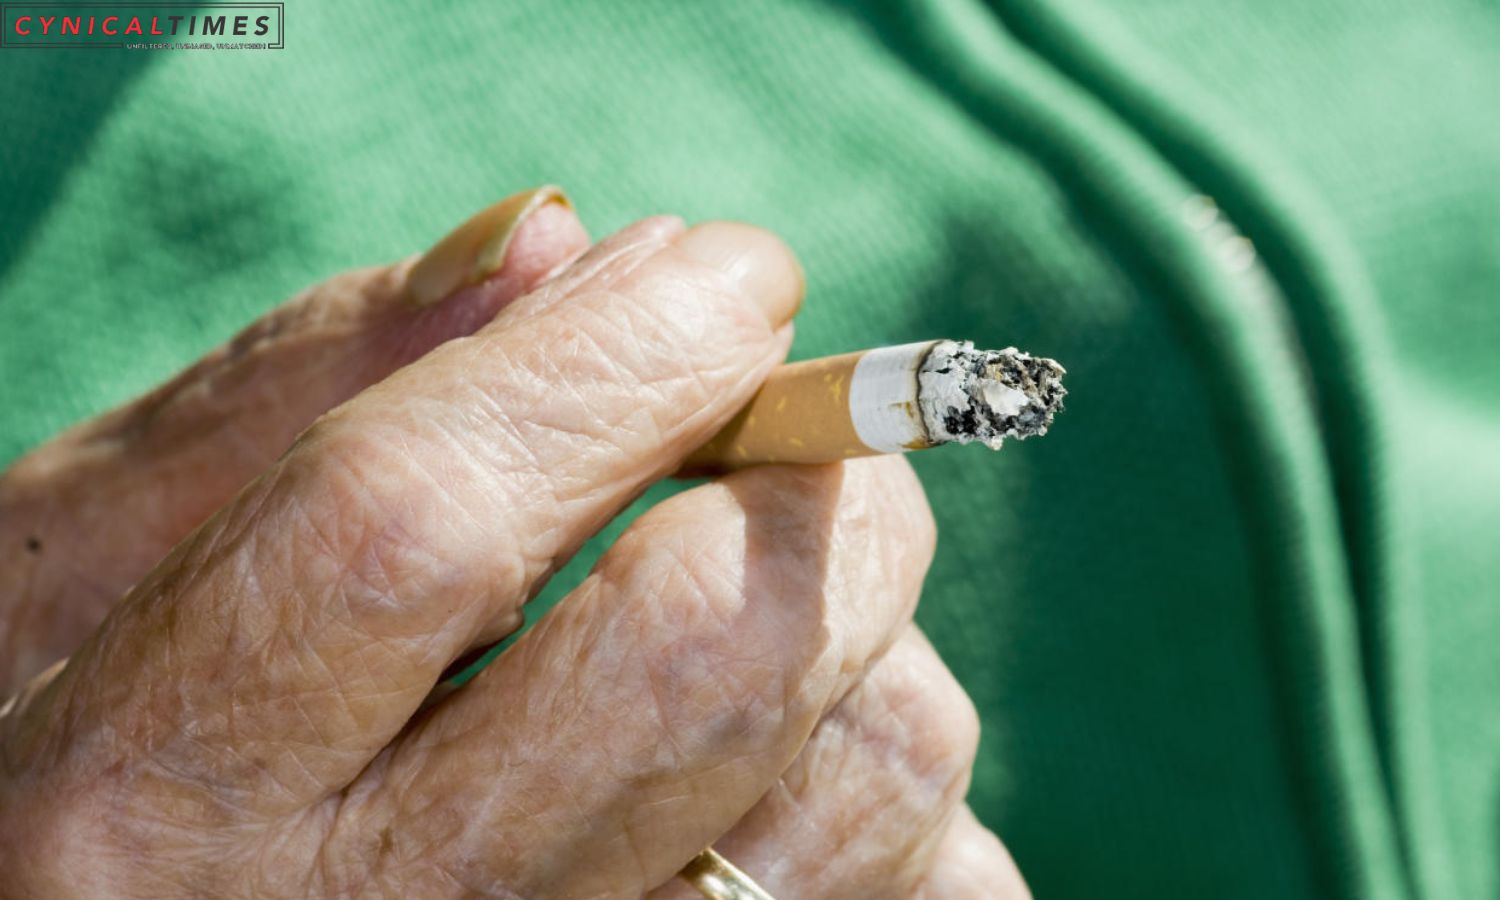 Older Americans Unexpected Smoking Trend